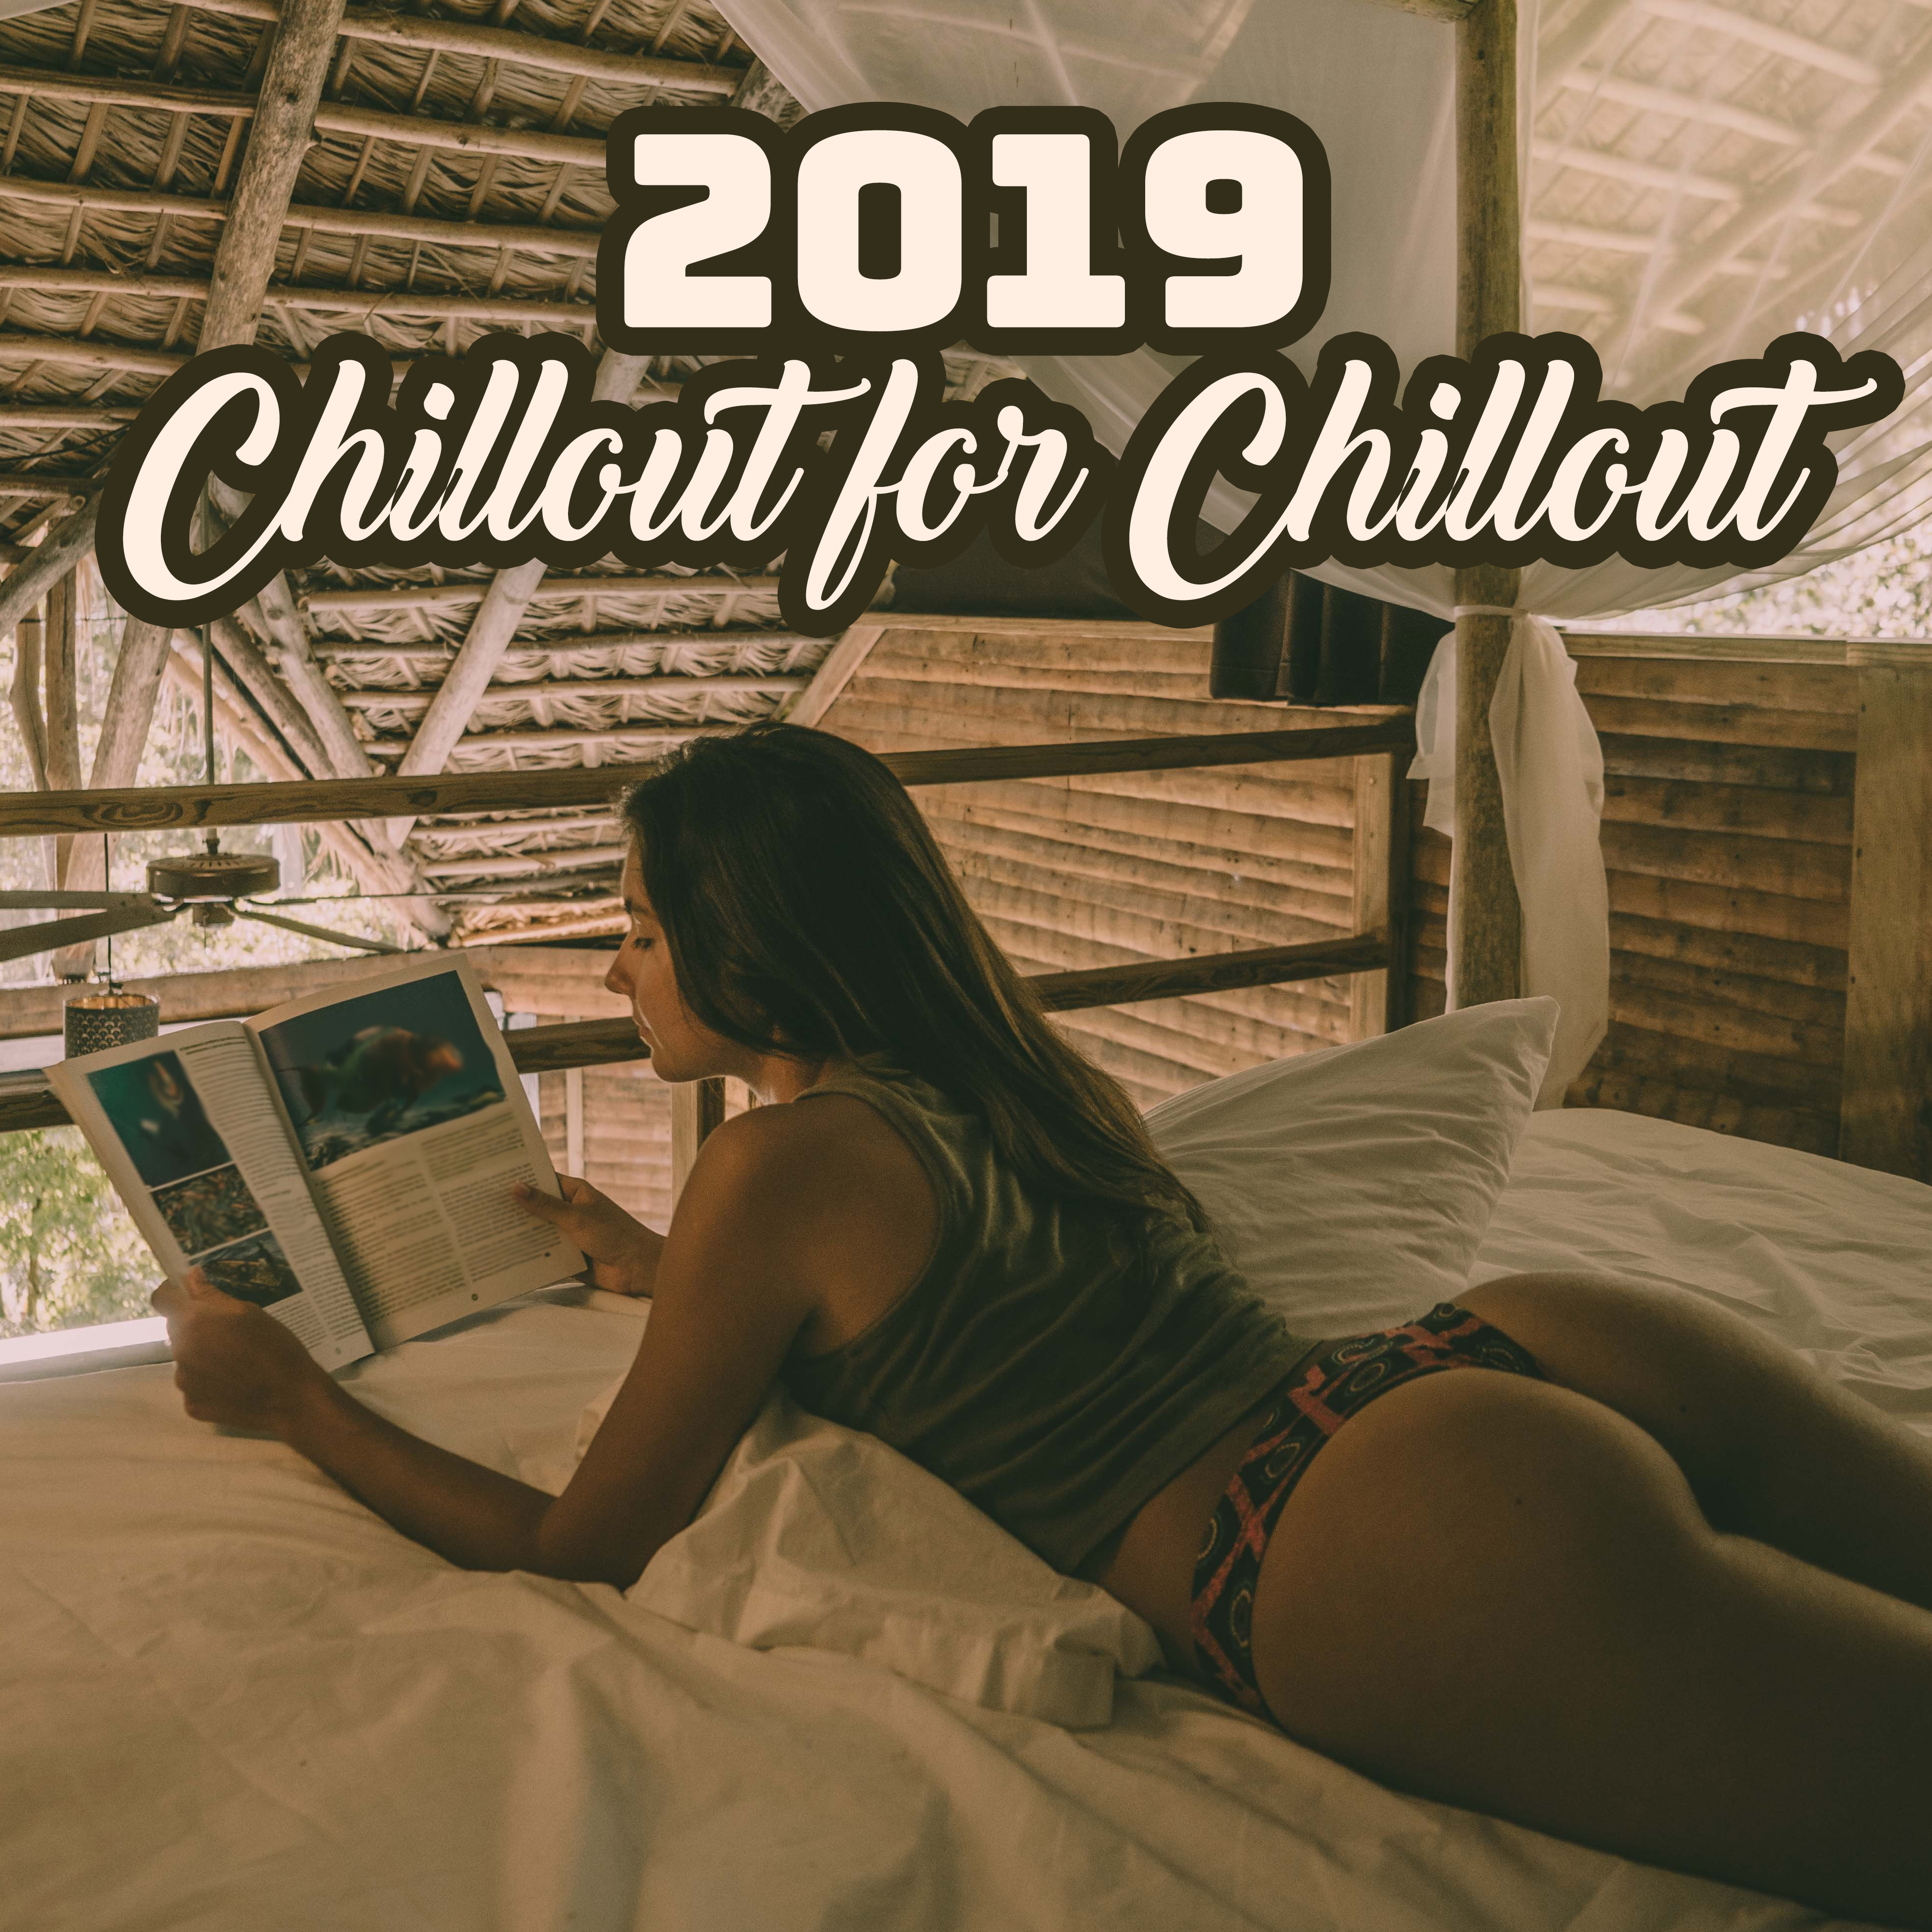 2019 Chillout for Chillout: Summertime 2019